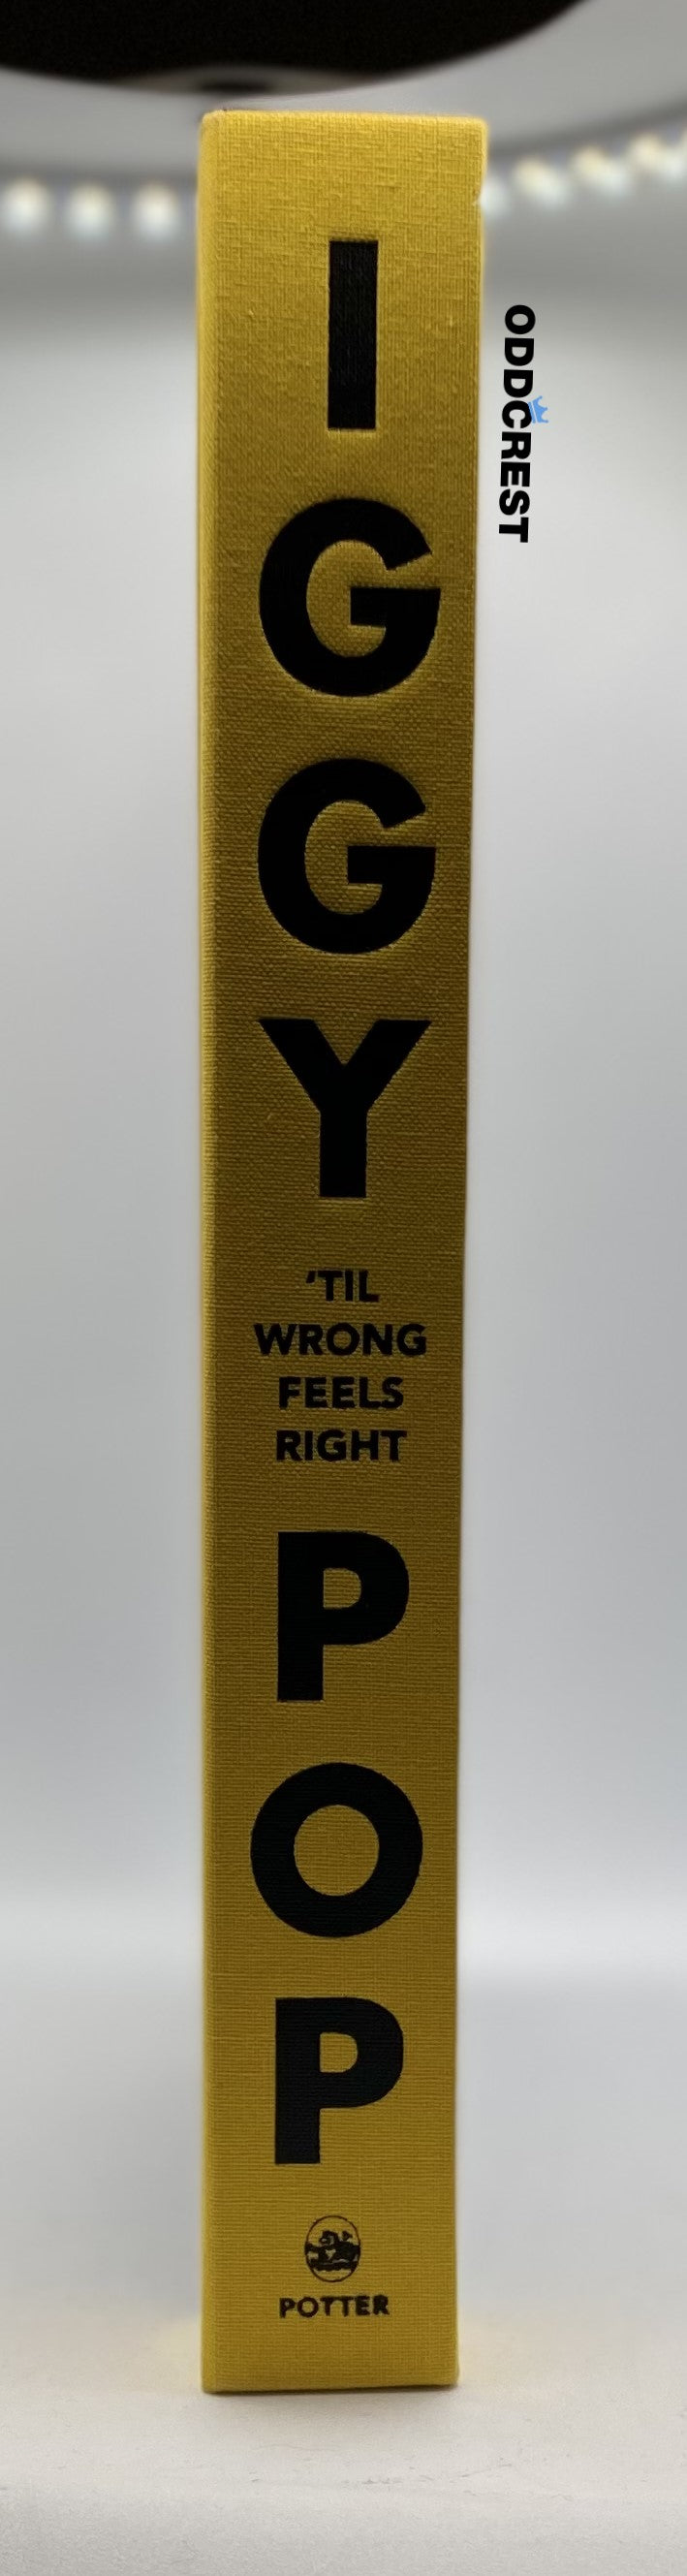 TIL WRONG FEELS RIGHT: LYRICS AND MORE by Iggy Pop  Clarkson Potter  HBK.